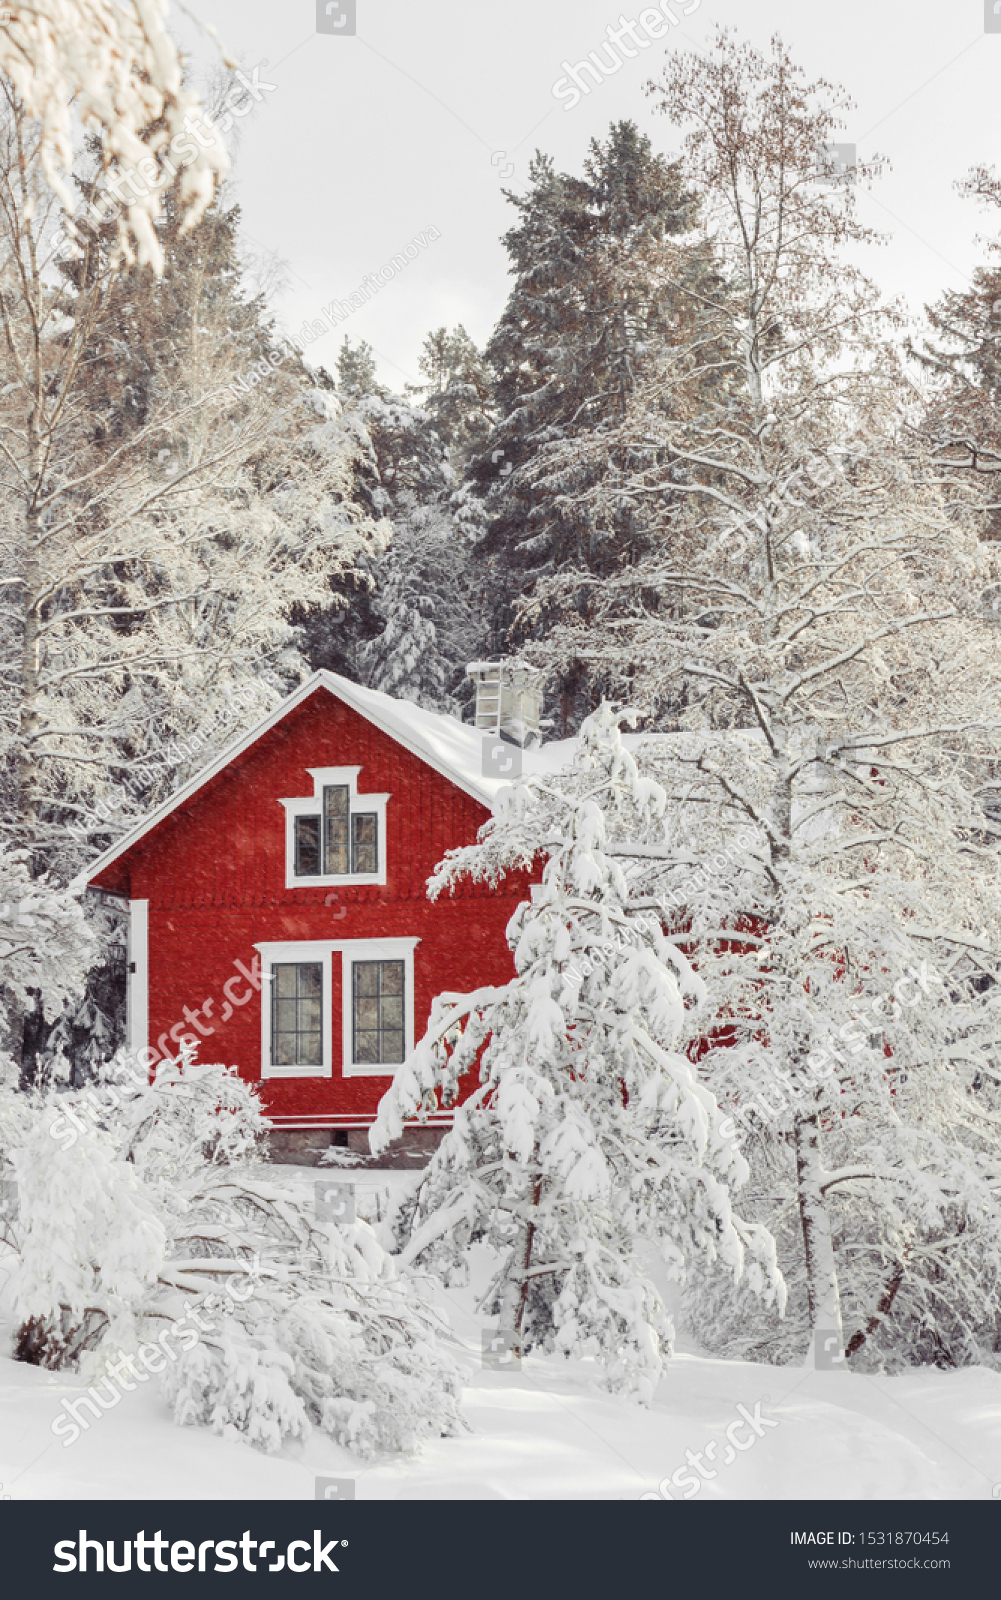 Beautiful red wooden house in snow fairy forest Sweden. House painted in traditional Swedish color. Winter scenery with red cottage surrounded by trees covered with snow and frost. Space for your text #1531870454